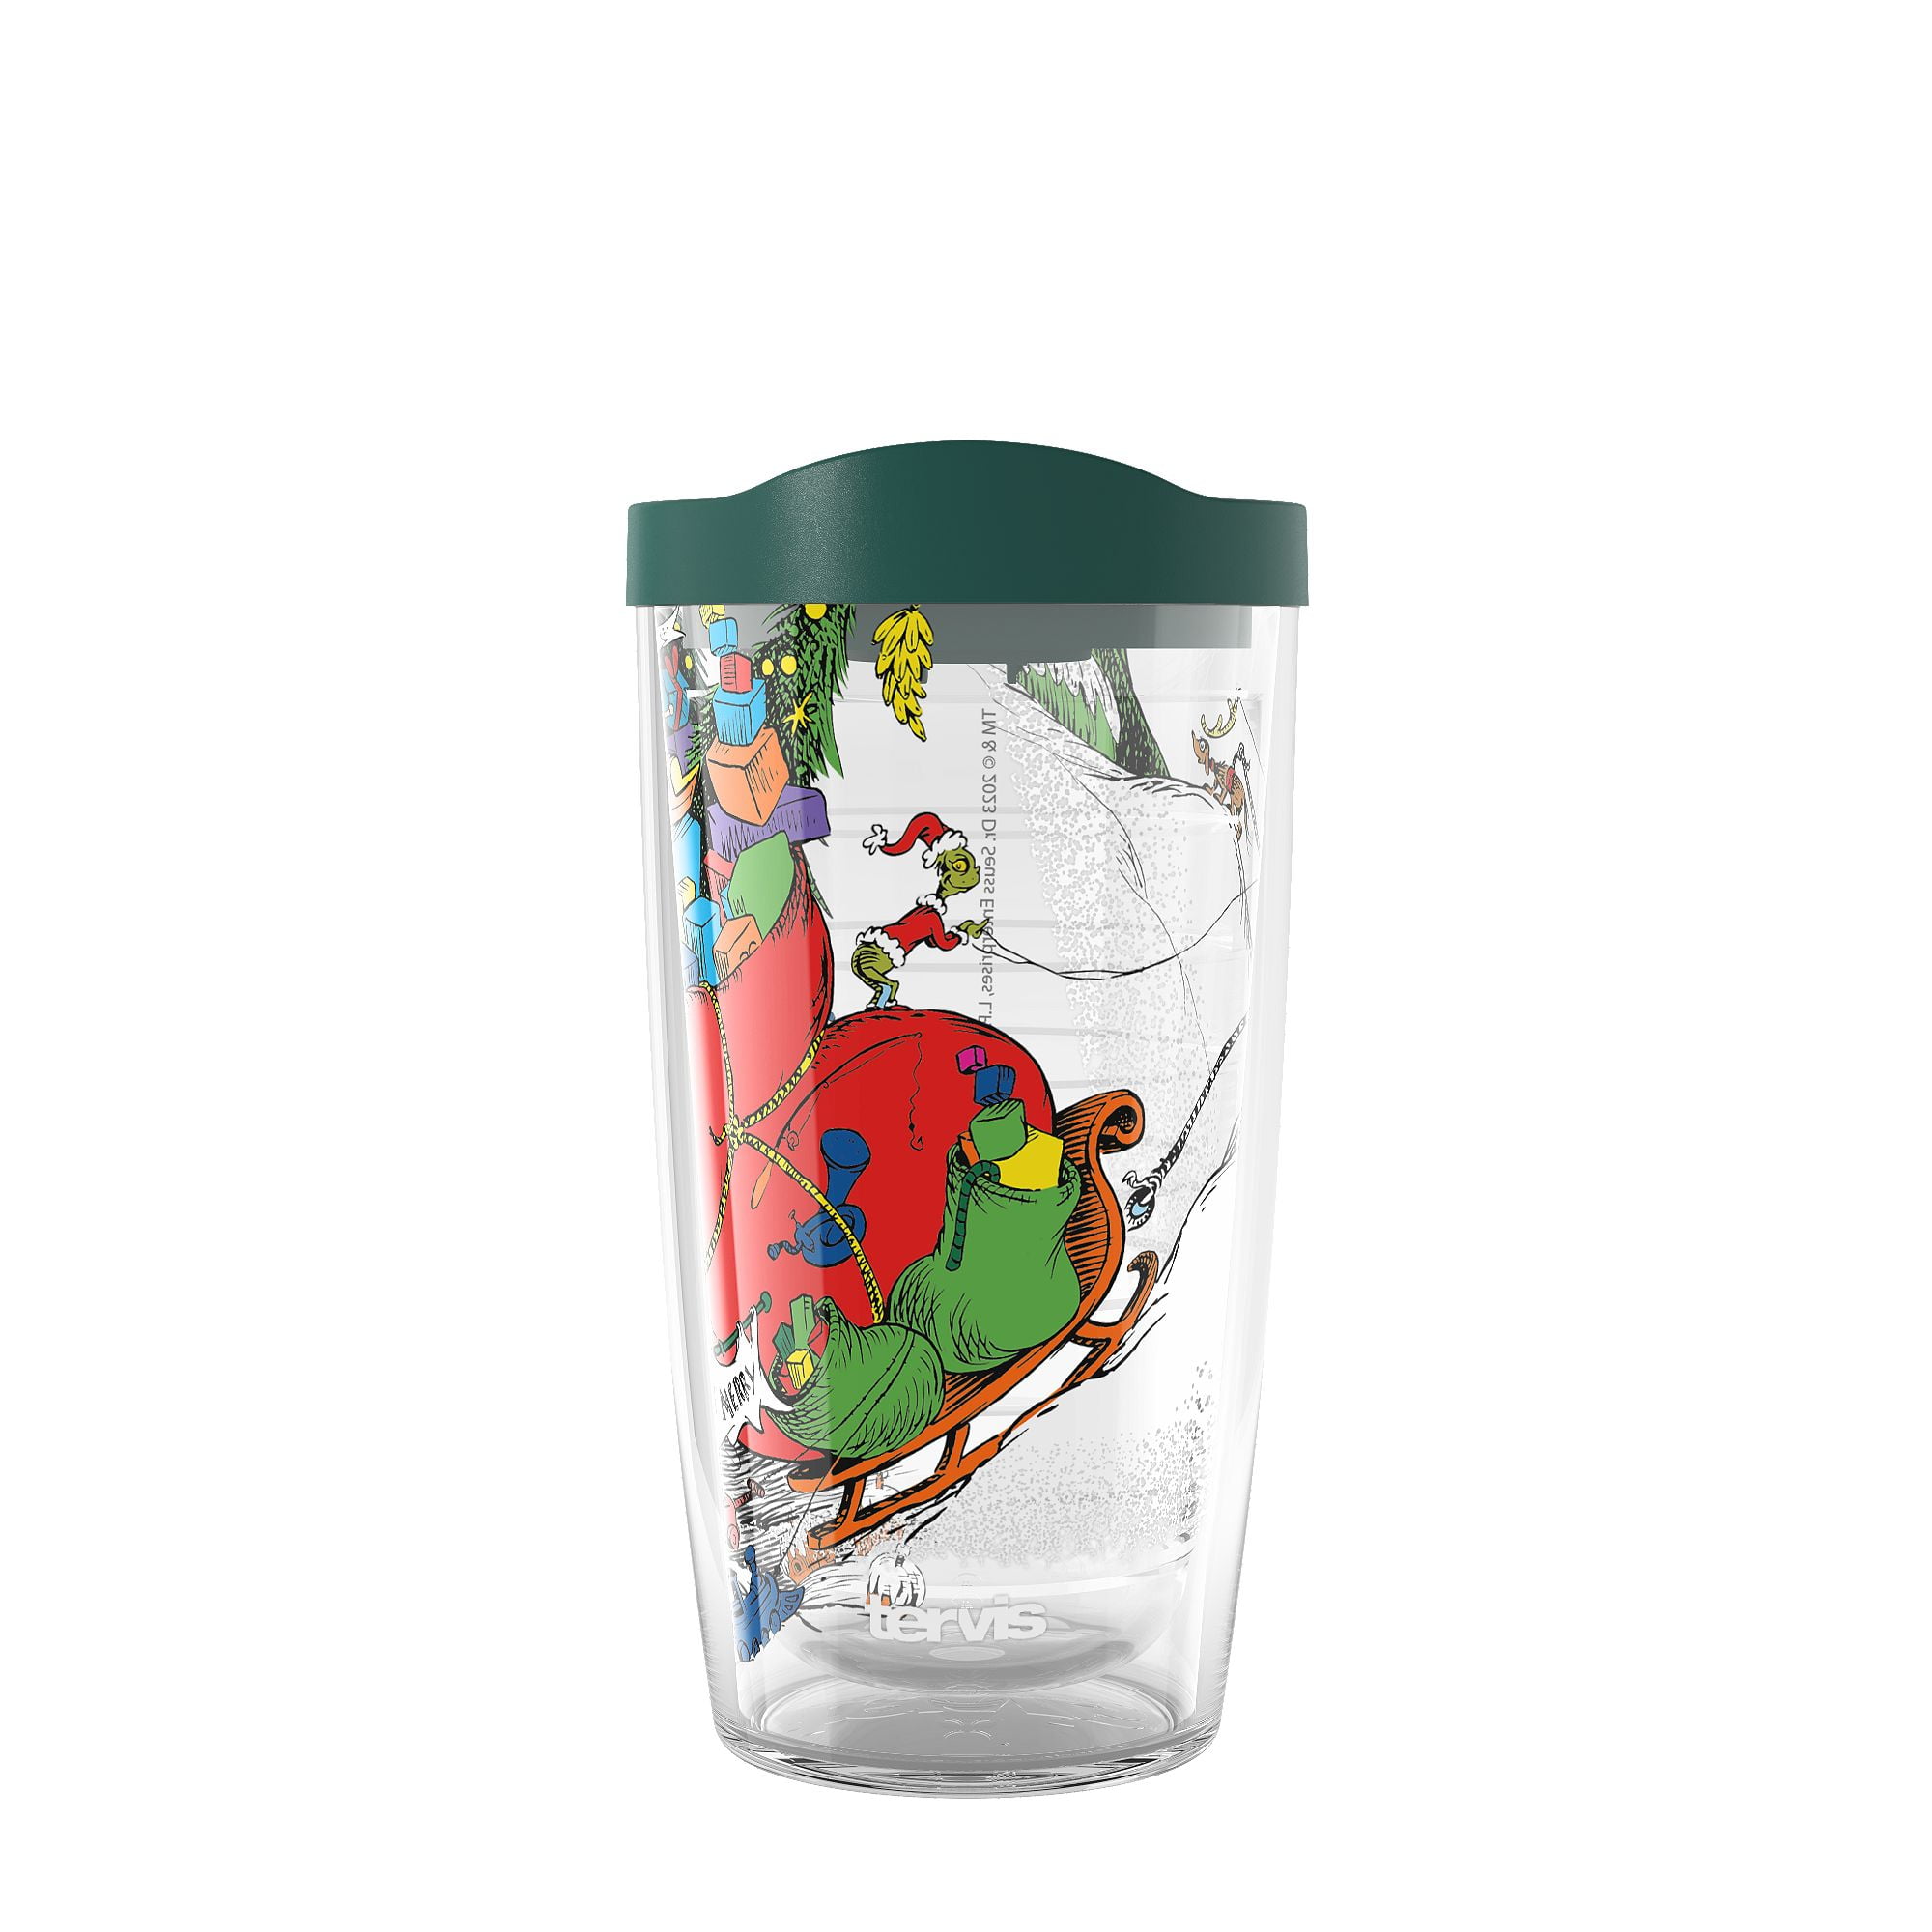  Personalized Insulated 20oz Tumbler, Stainless Steel  Insulated Cup, Travel Cup, Double Wall Coffee Cup for Hot and Cold Drinks, Grinch Tumbler